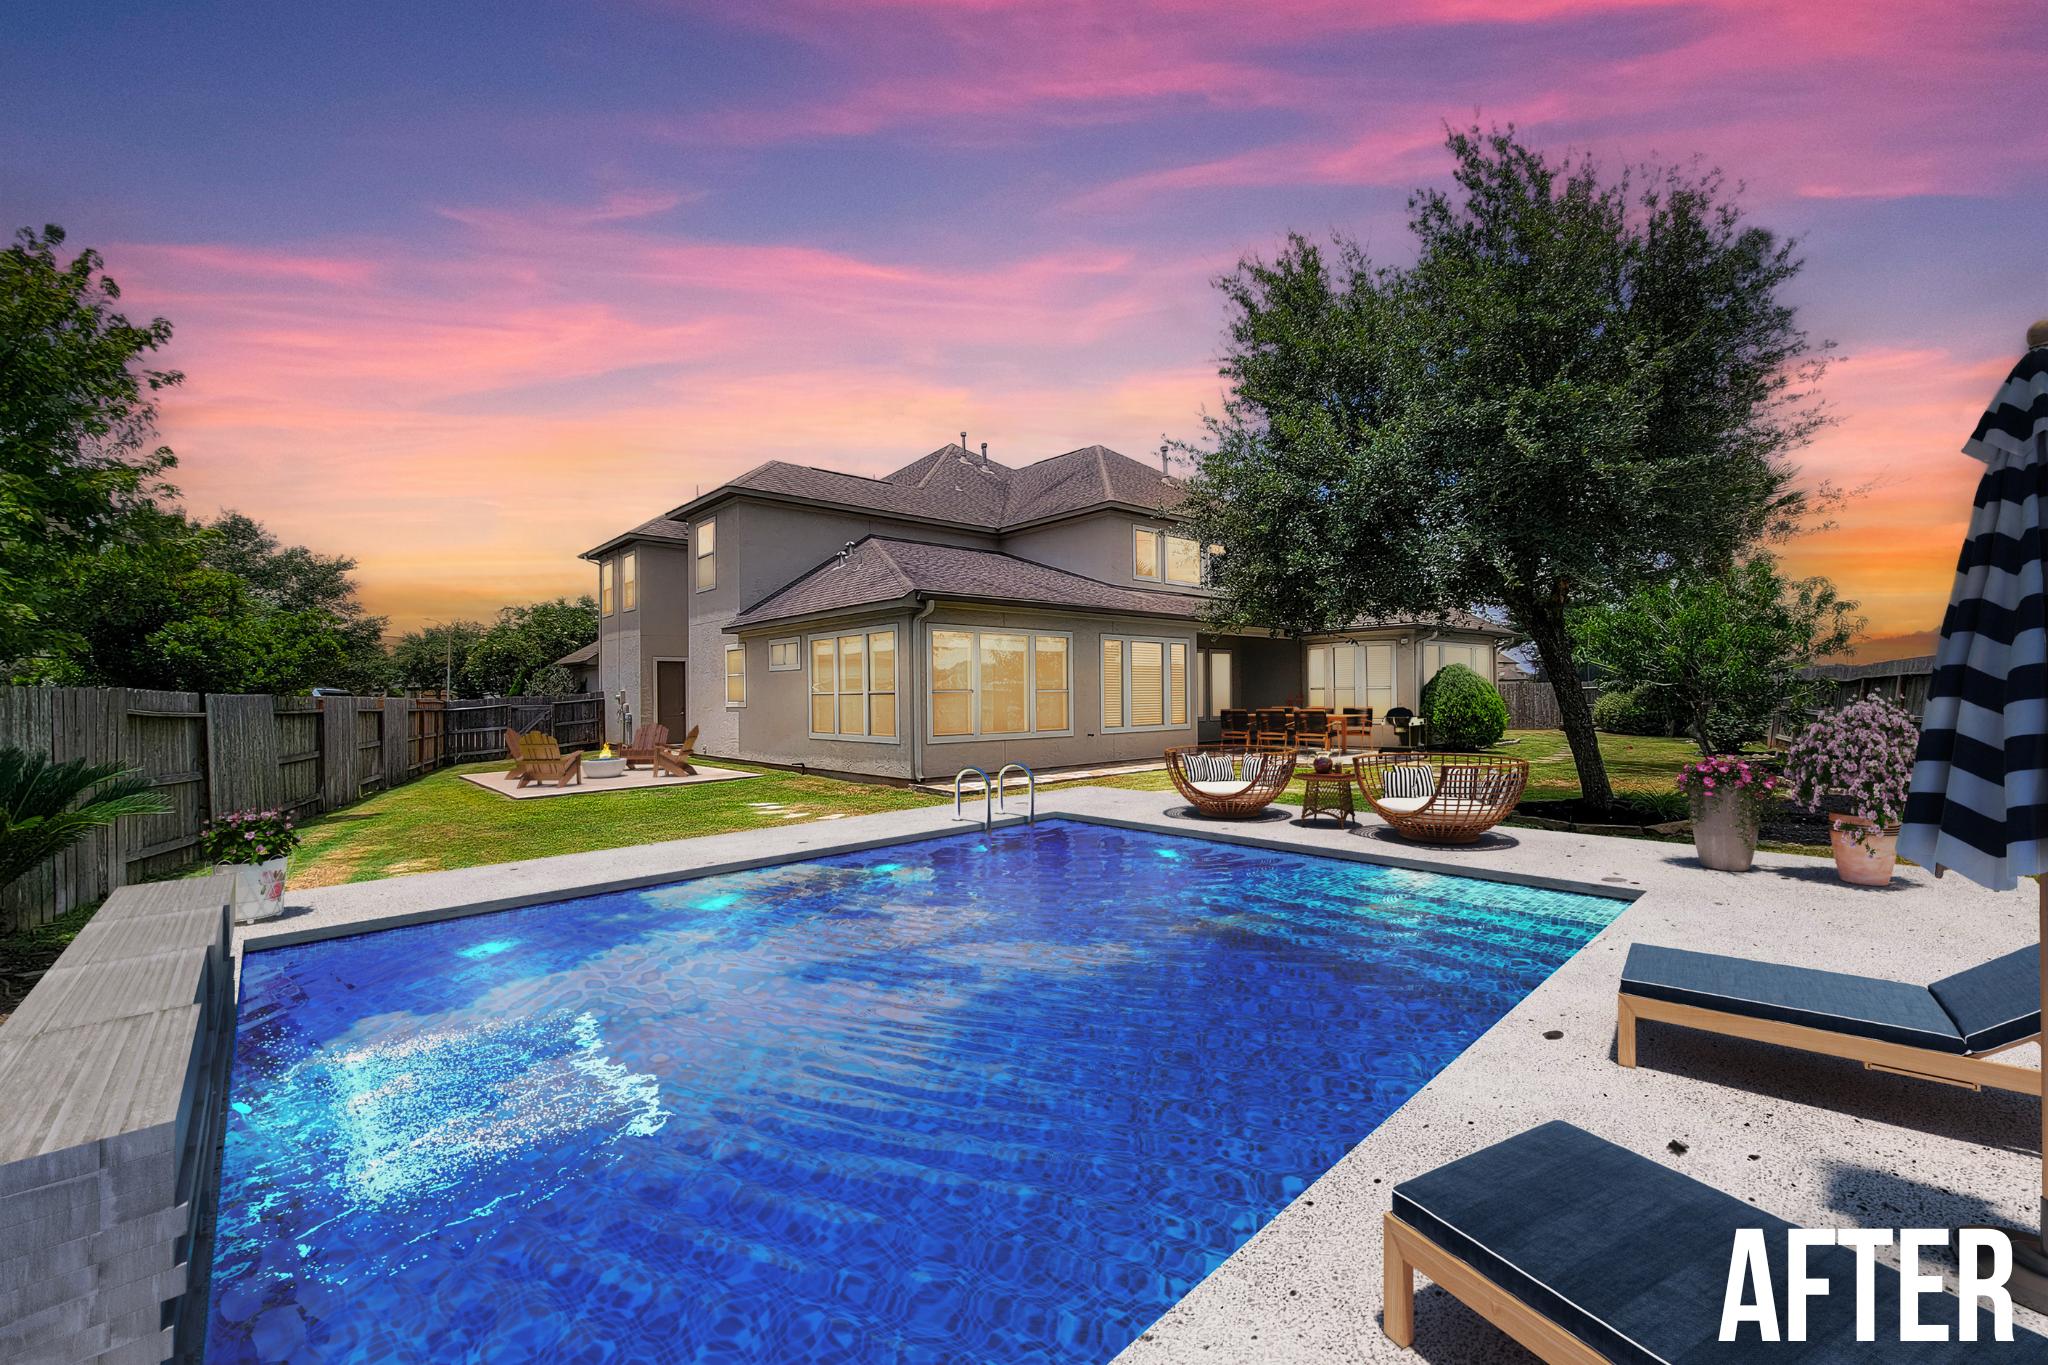 Square Foot Productions Virtual Remodel, after image of a residential home with a pool in the backyard and sunset in the background